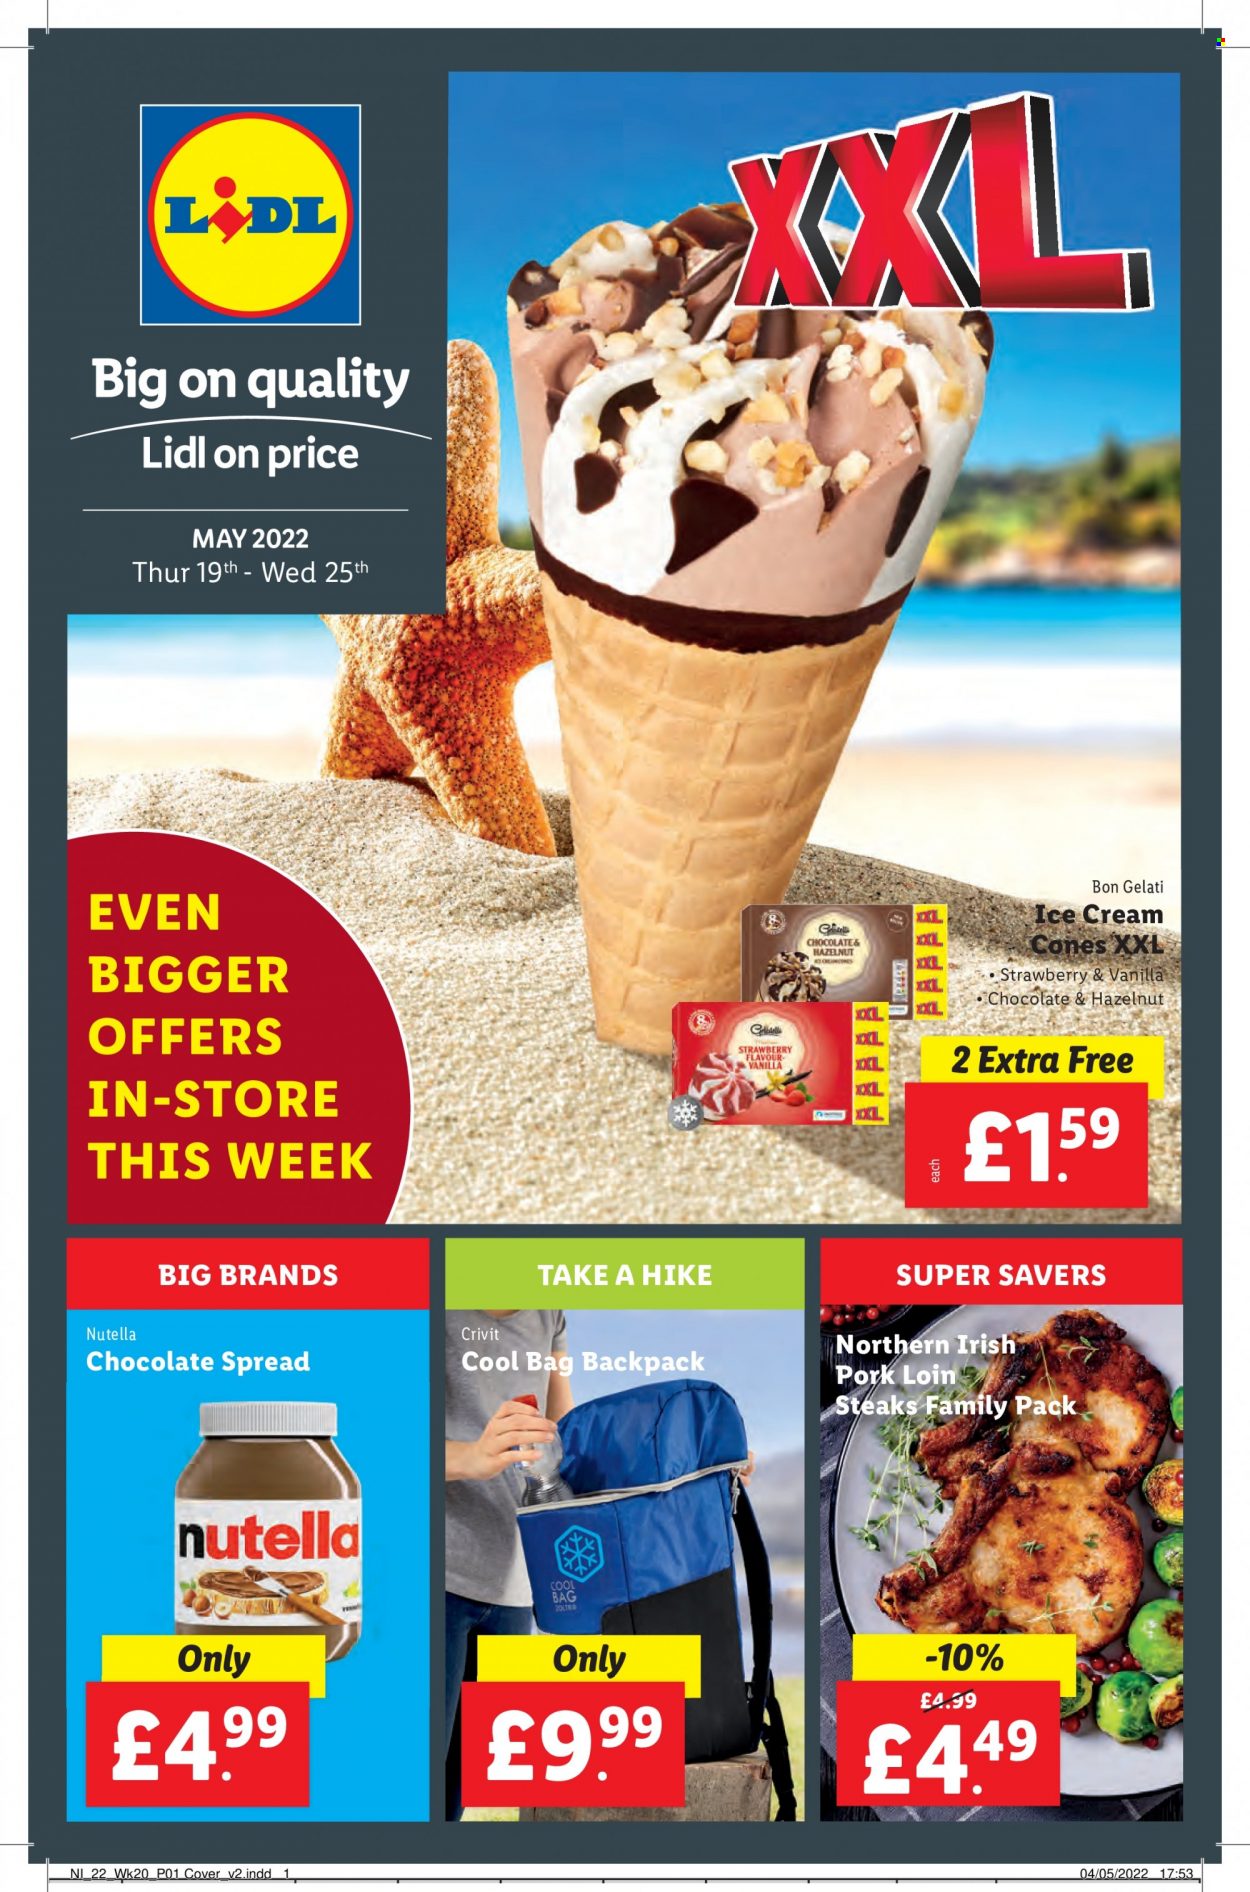 thumbnail - Lidl offer  - 19/05/2022 - 25/05/2022 - Sales products - Crivit, steak, pork loin, pork meat, ice cream, Nutella, bag, backpack. Page 1.